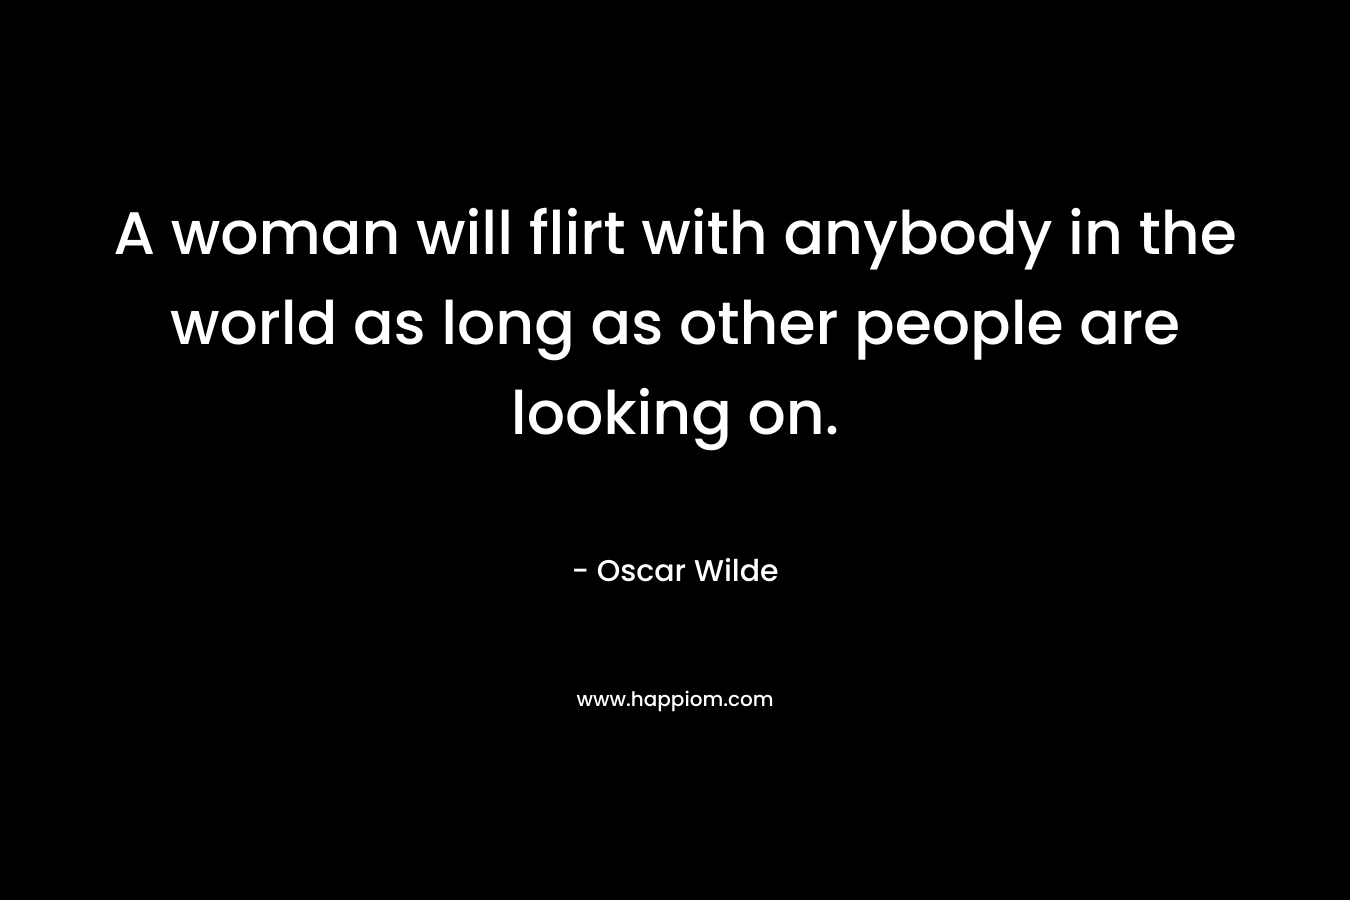 A woman will flirt with anybody in the world as long as other people are looking on. – Oscar Wilde